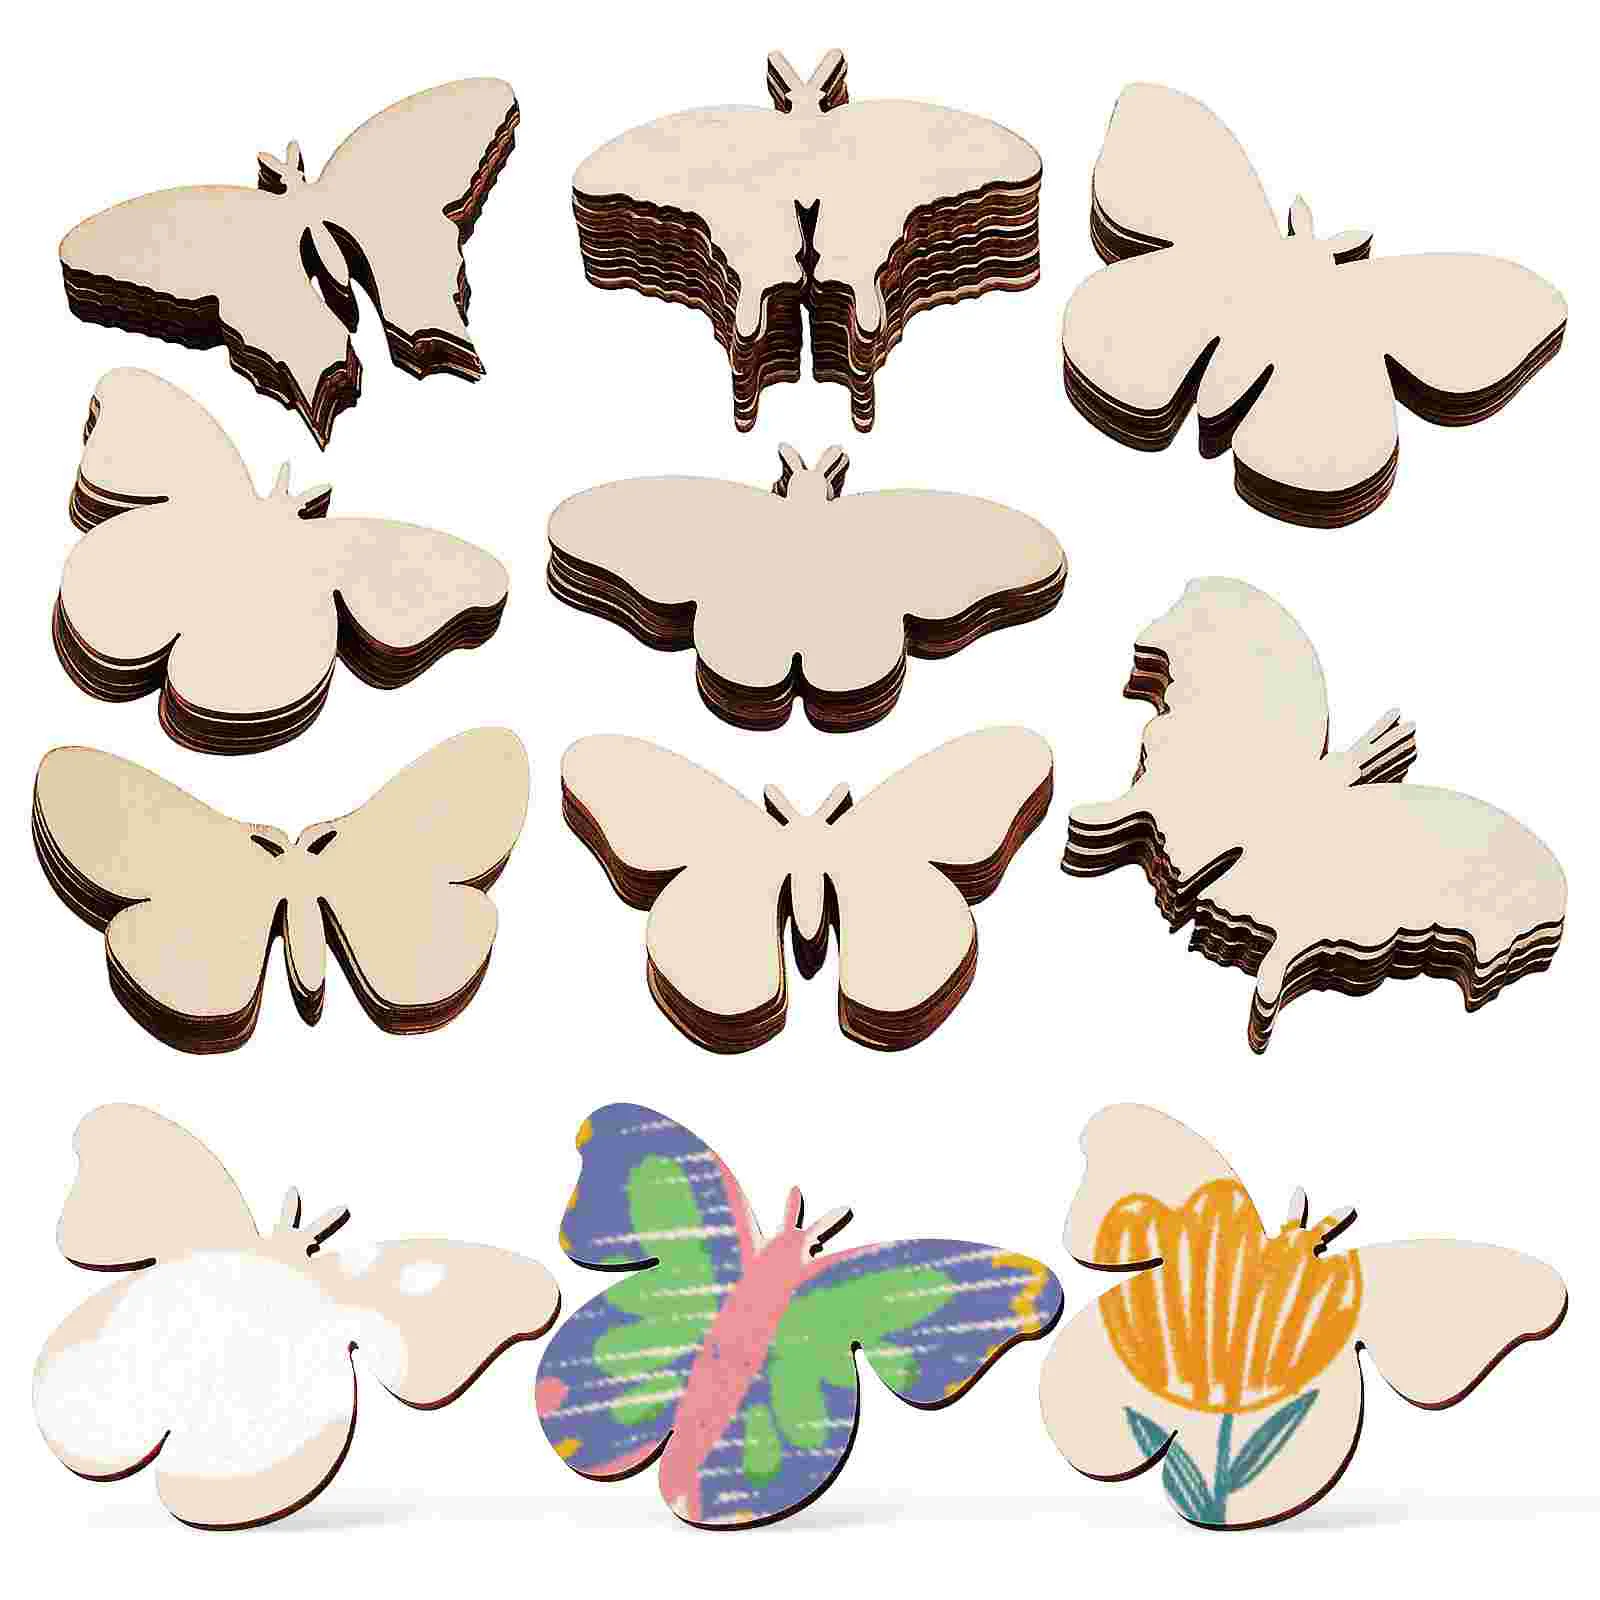 

54 Pcs Butterfly Cutouts Wood Cutouts Unfinished Wood Crafts Crafting Supplies For Home Festival Decoration